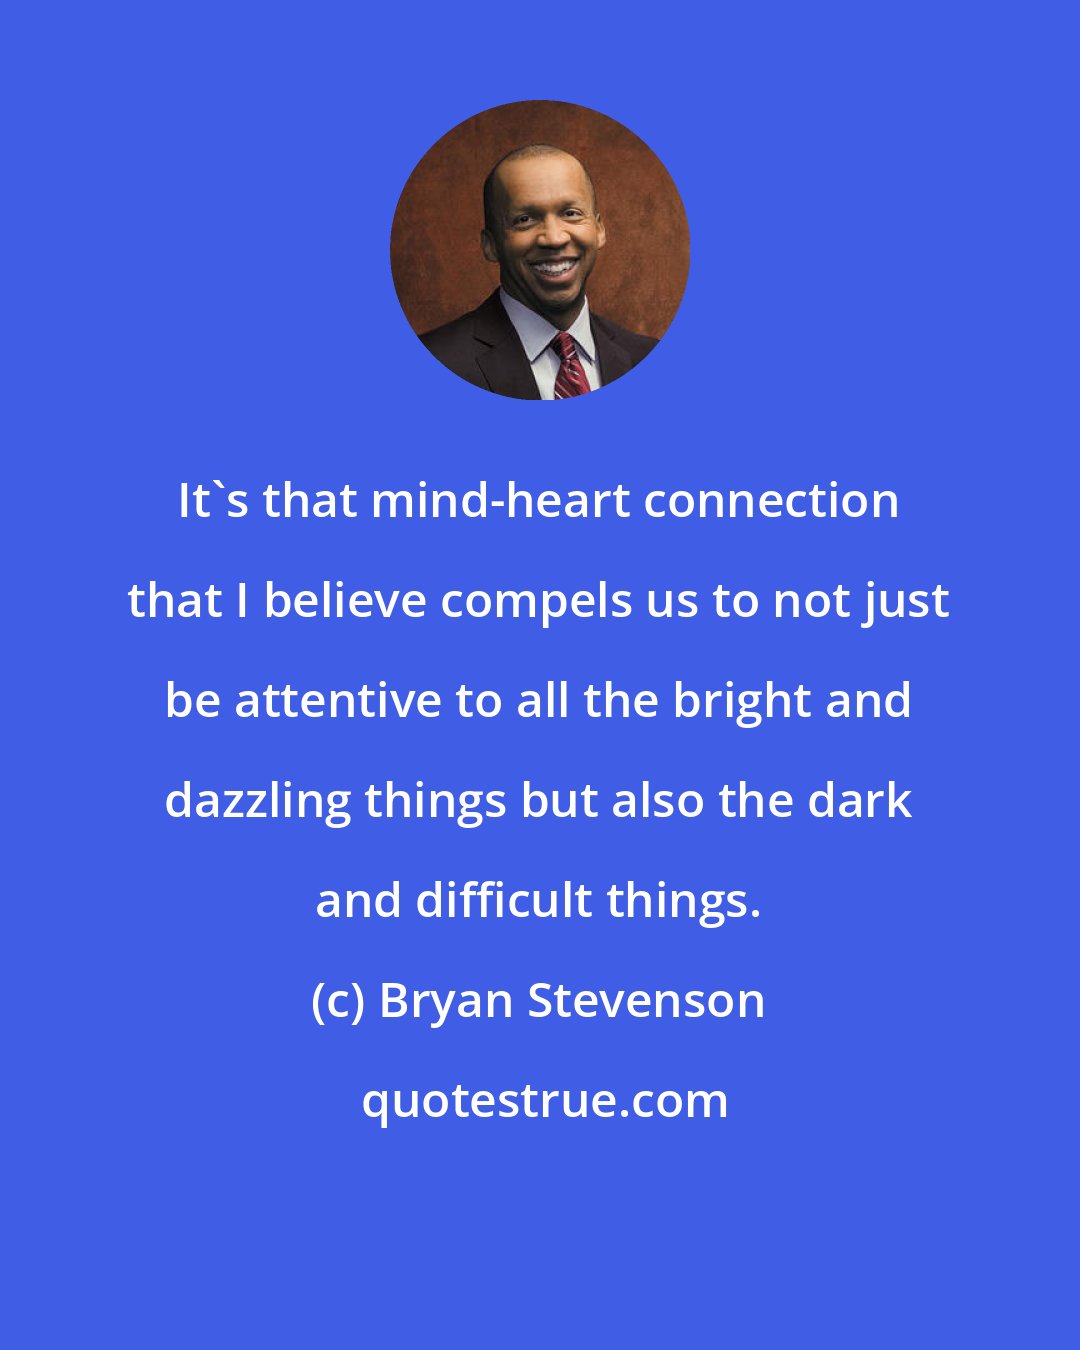 Bryan Stevenson: It's that mind-heart connection that I believe compels us to not just be attentive to all the bright and dazzling things but also the dark and difficult things.